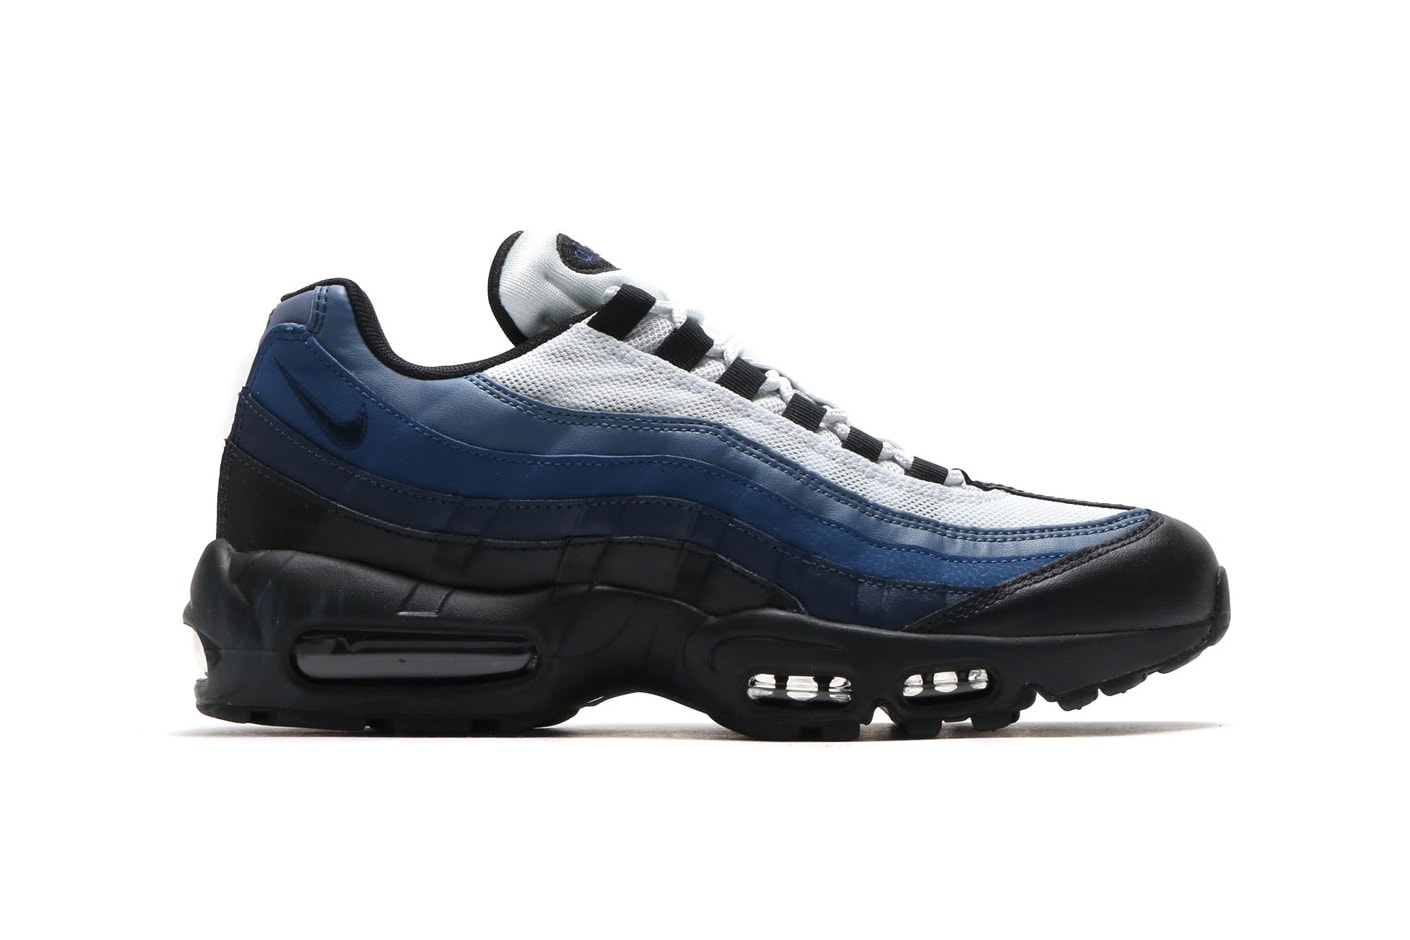 Nike air max 95 sand obsidian navy blue spring summer 2018 drop release date info new colorway 749766-028 749766-108